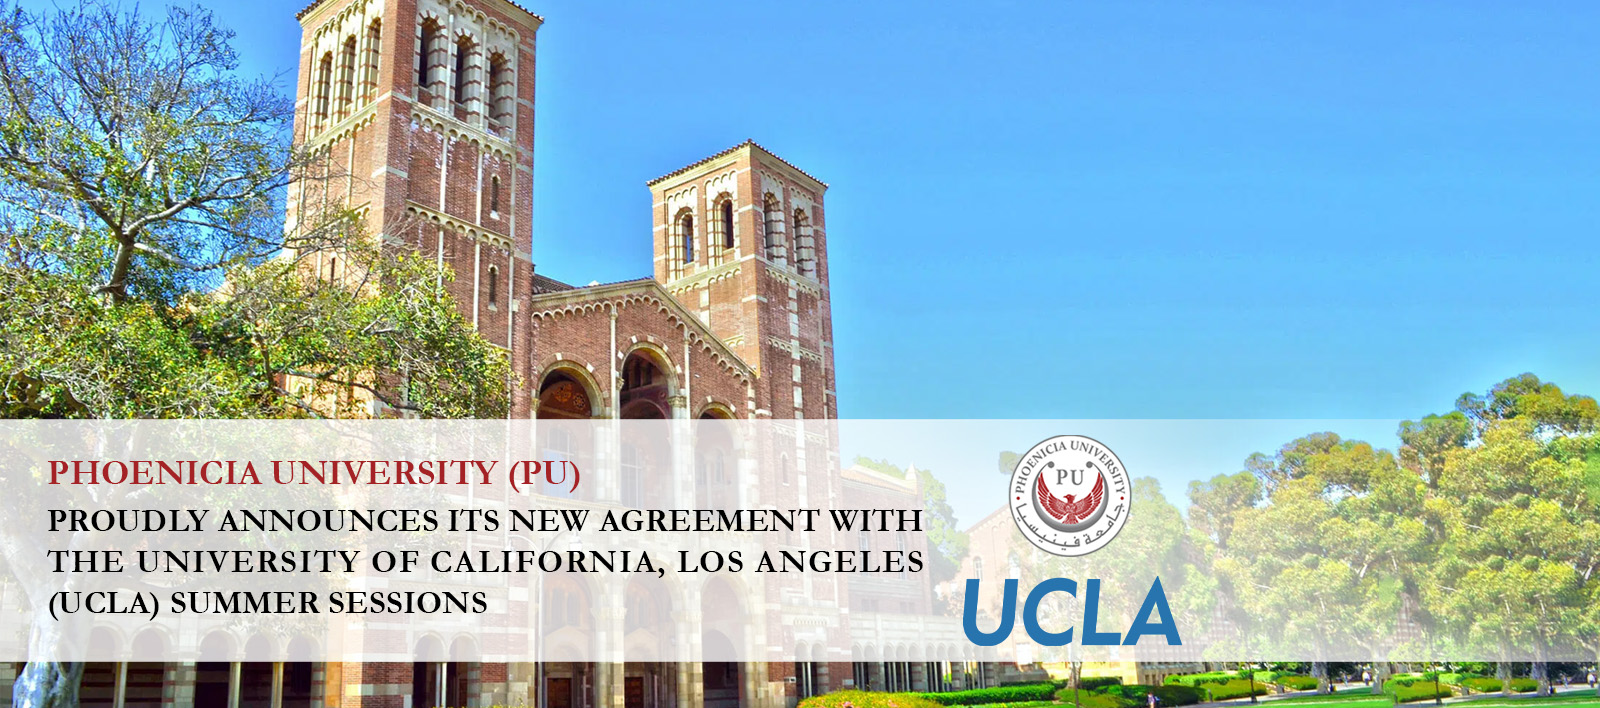 PU's agreement with the University of California